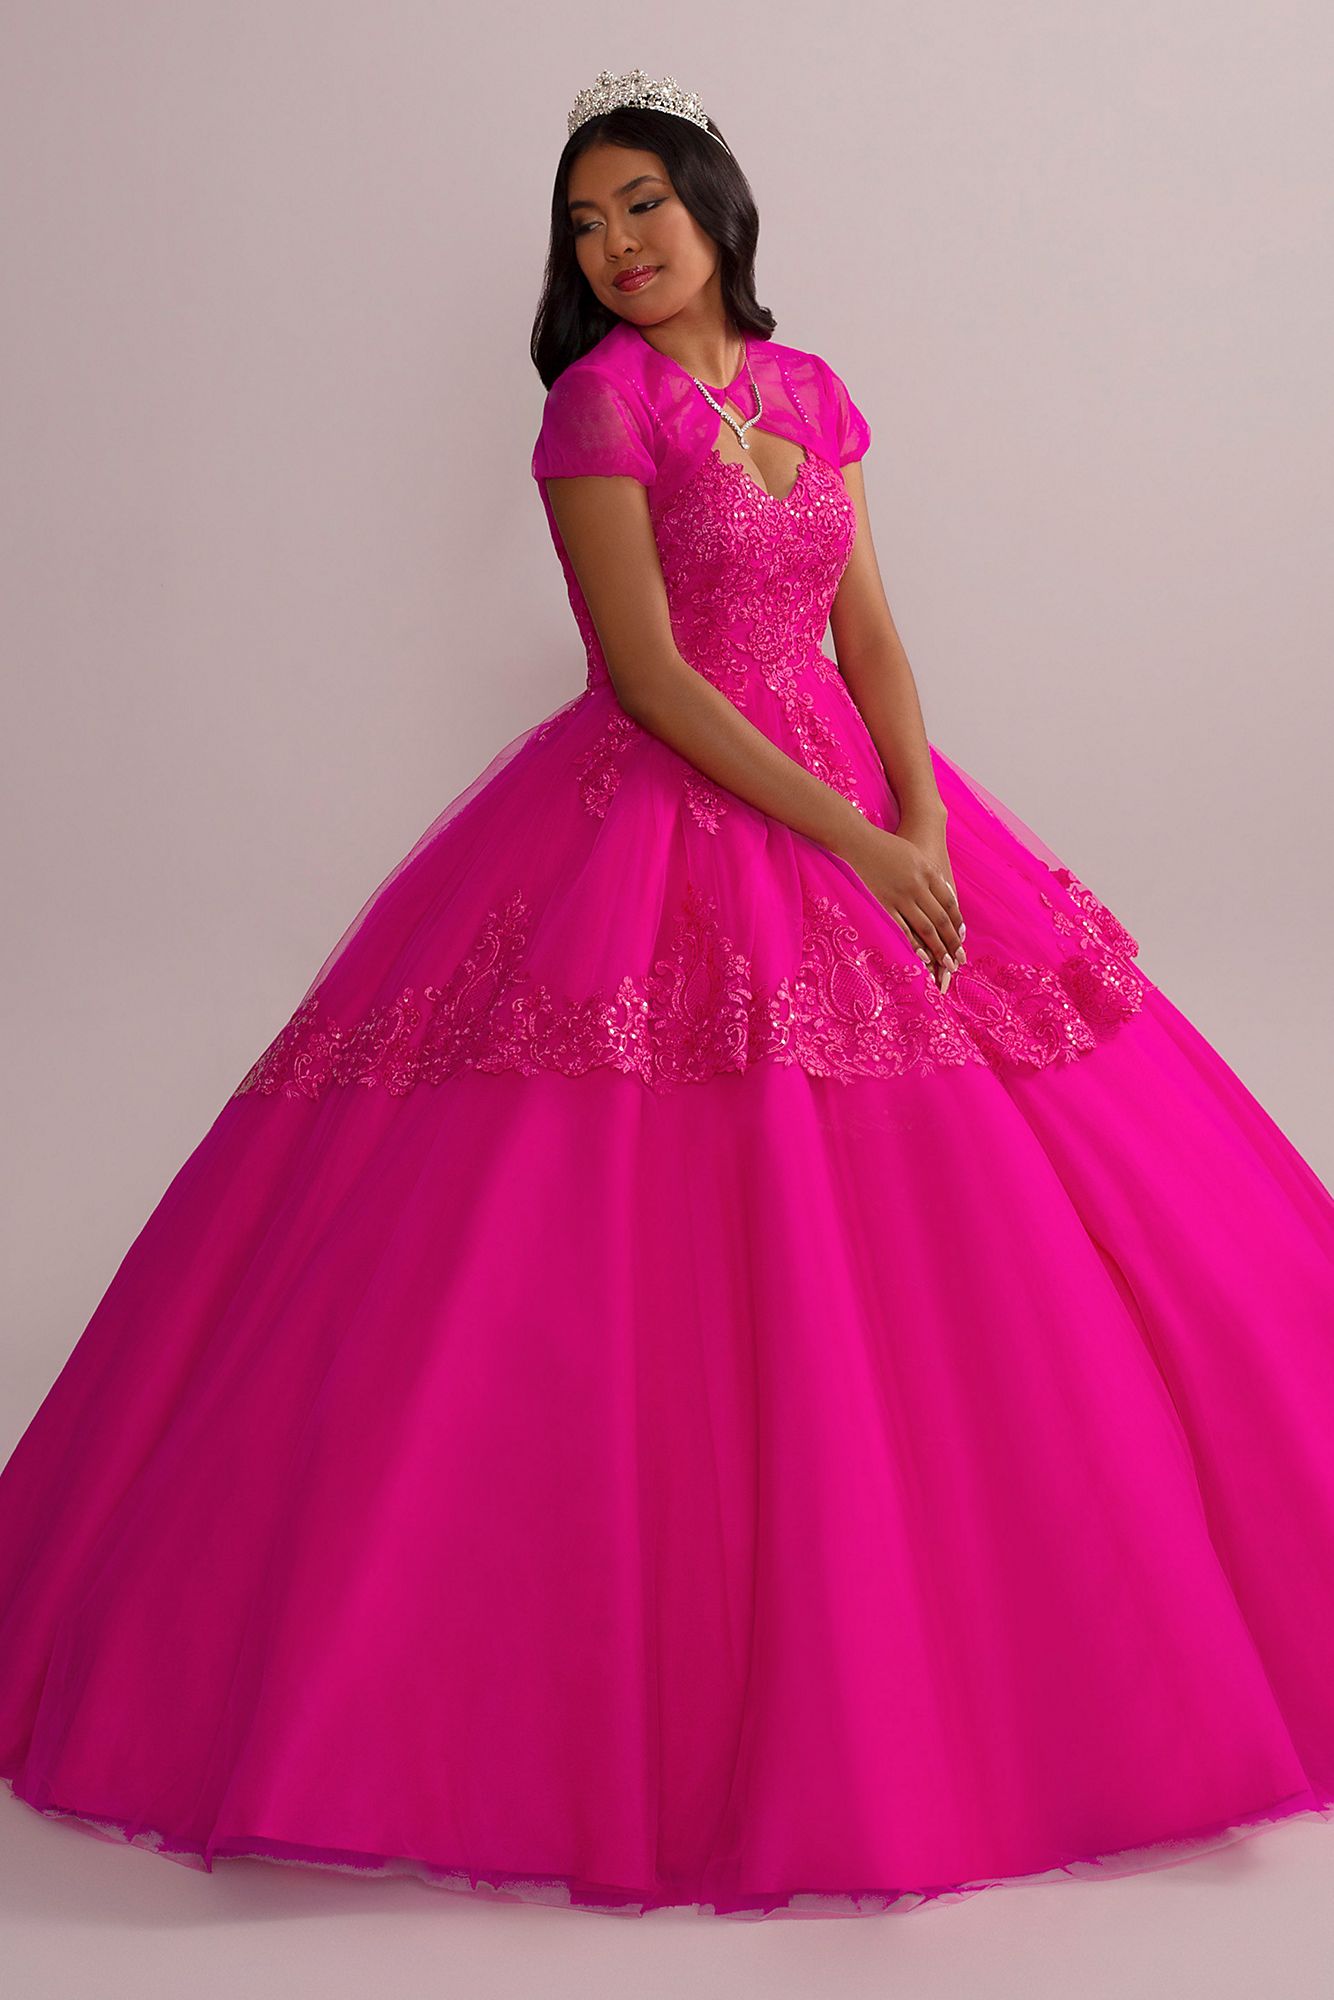 Corded Lace Quince Ball Gown with Bolero Fifteen Roses FR2112